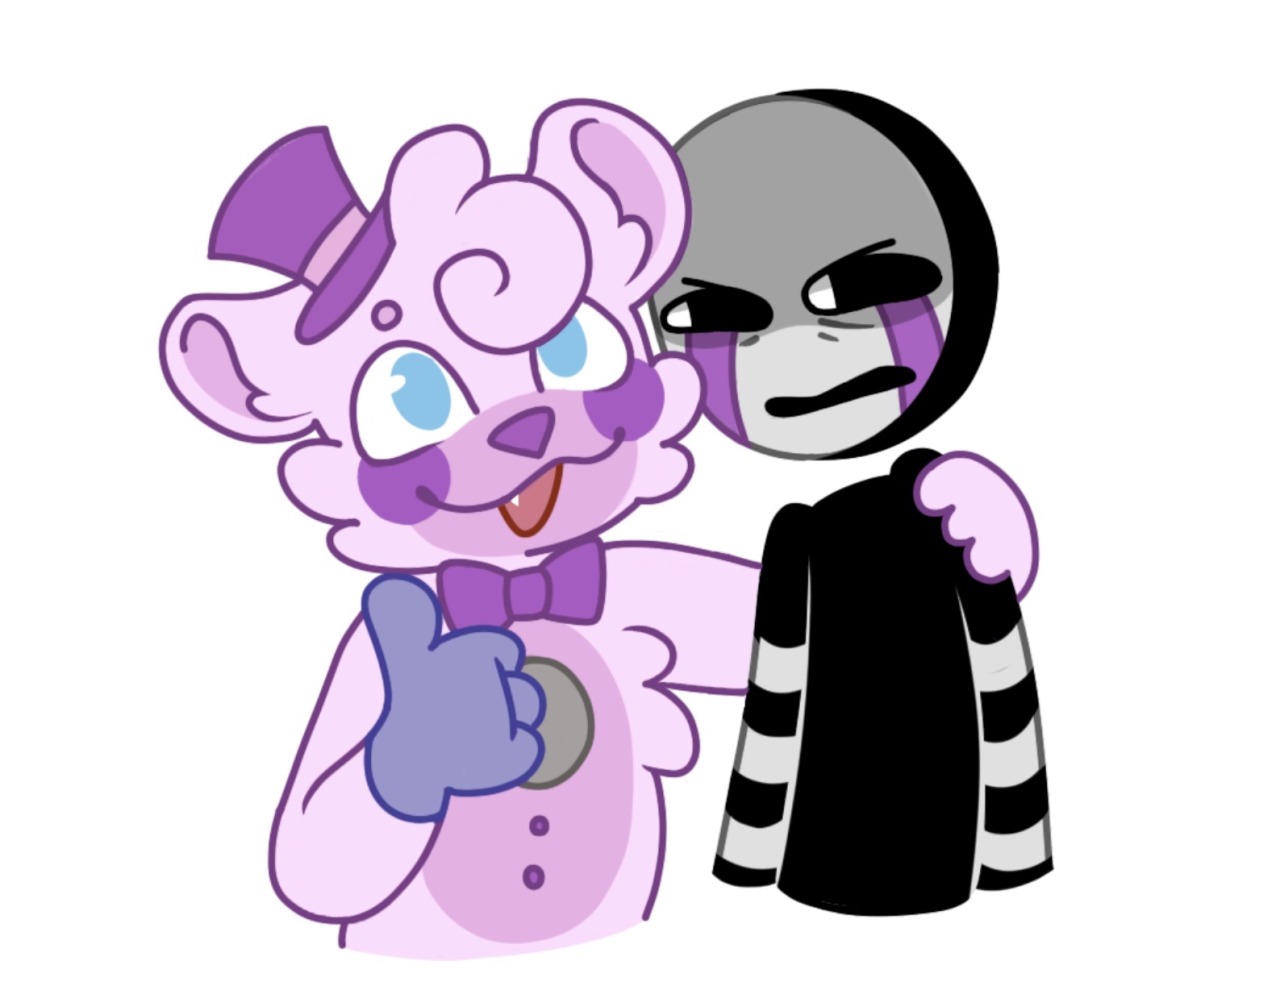 Digital drawing of Funtime Freddy and The Puppet hanging out, Freddy looks at the camera with a smile, a thumbs up, and his arm around Puppet, who looks at him in distate.